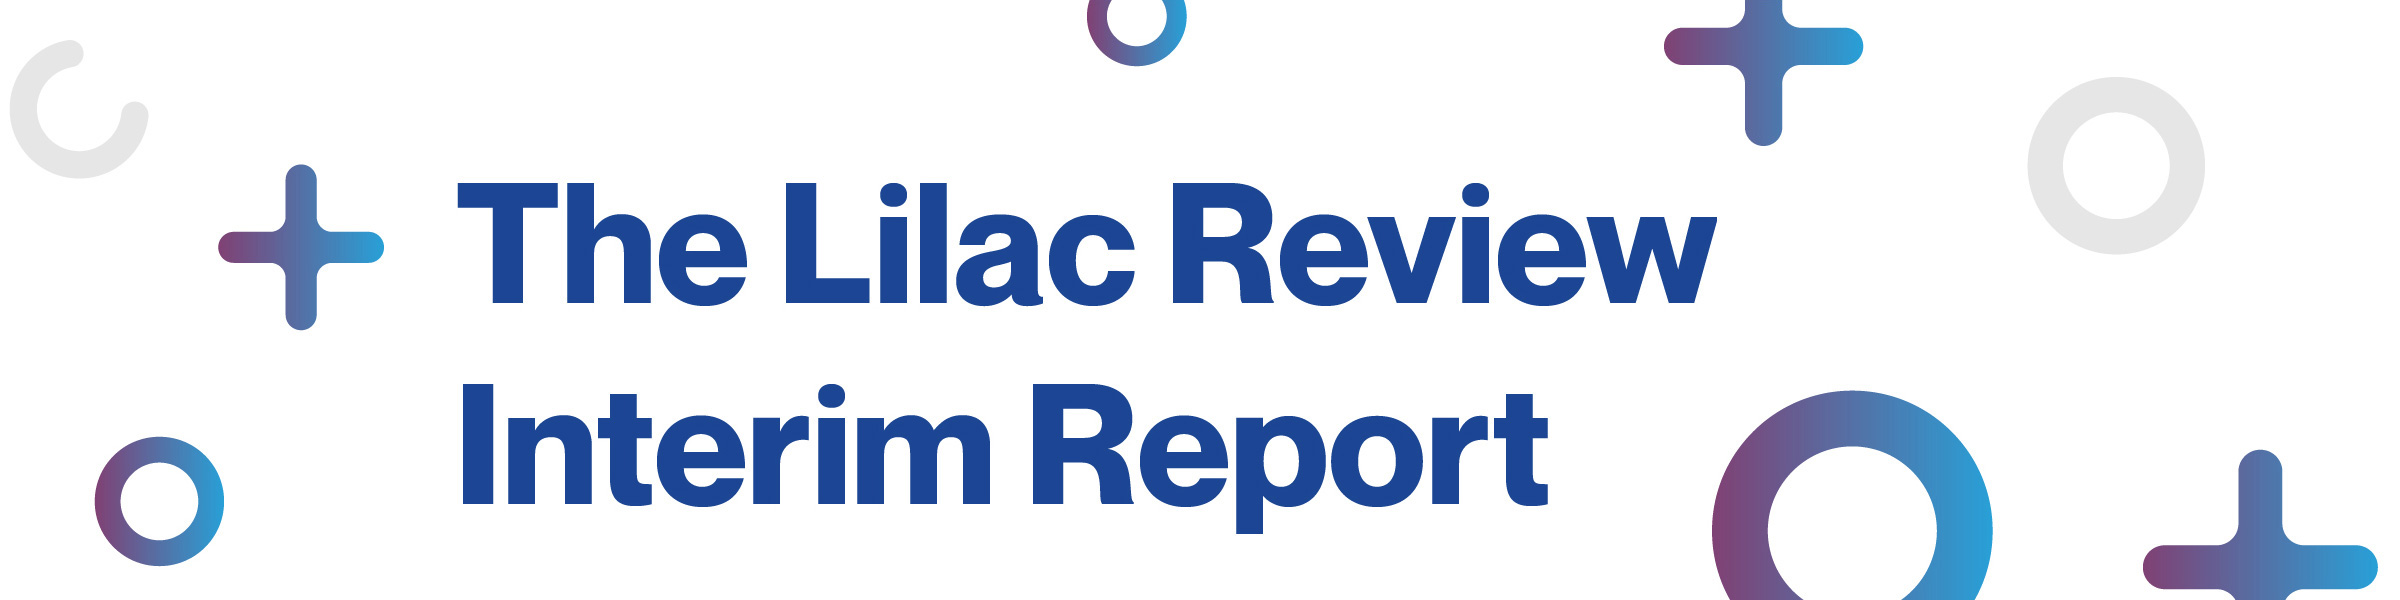 A white background with the words 'The Lilac Review Interim Report' in the centre. The words are surrounded by various shapes in shades of blue and purple.